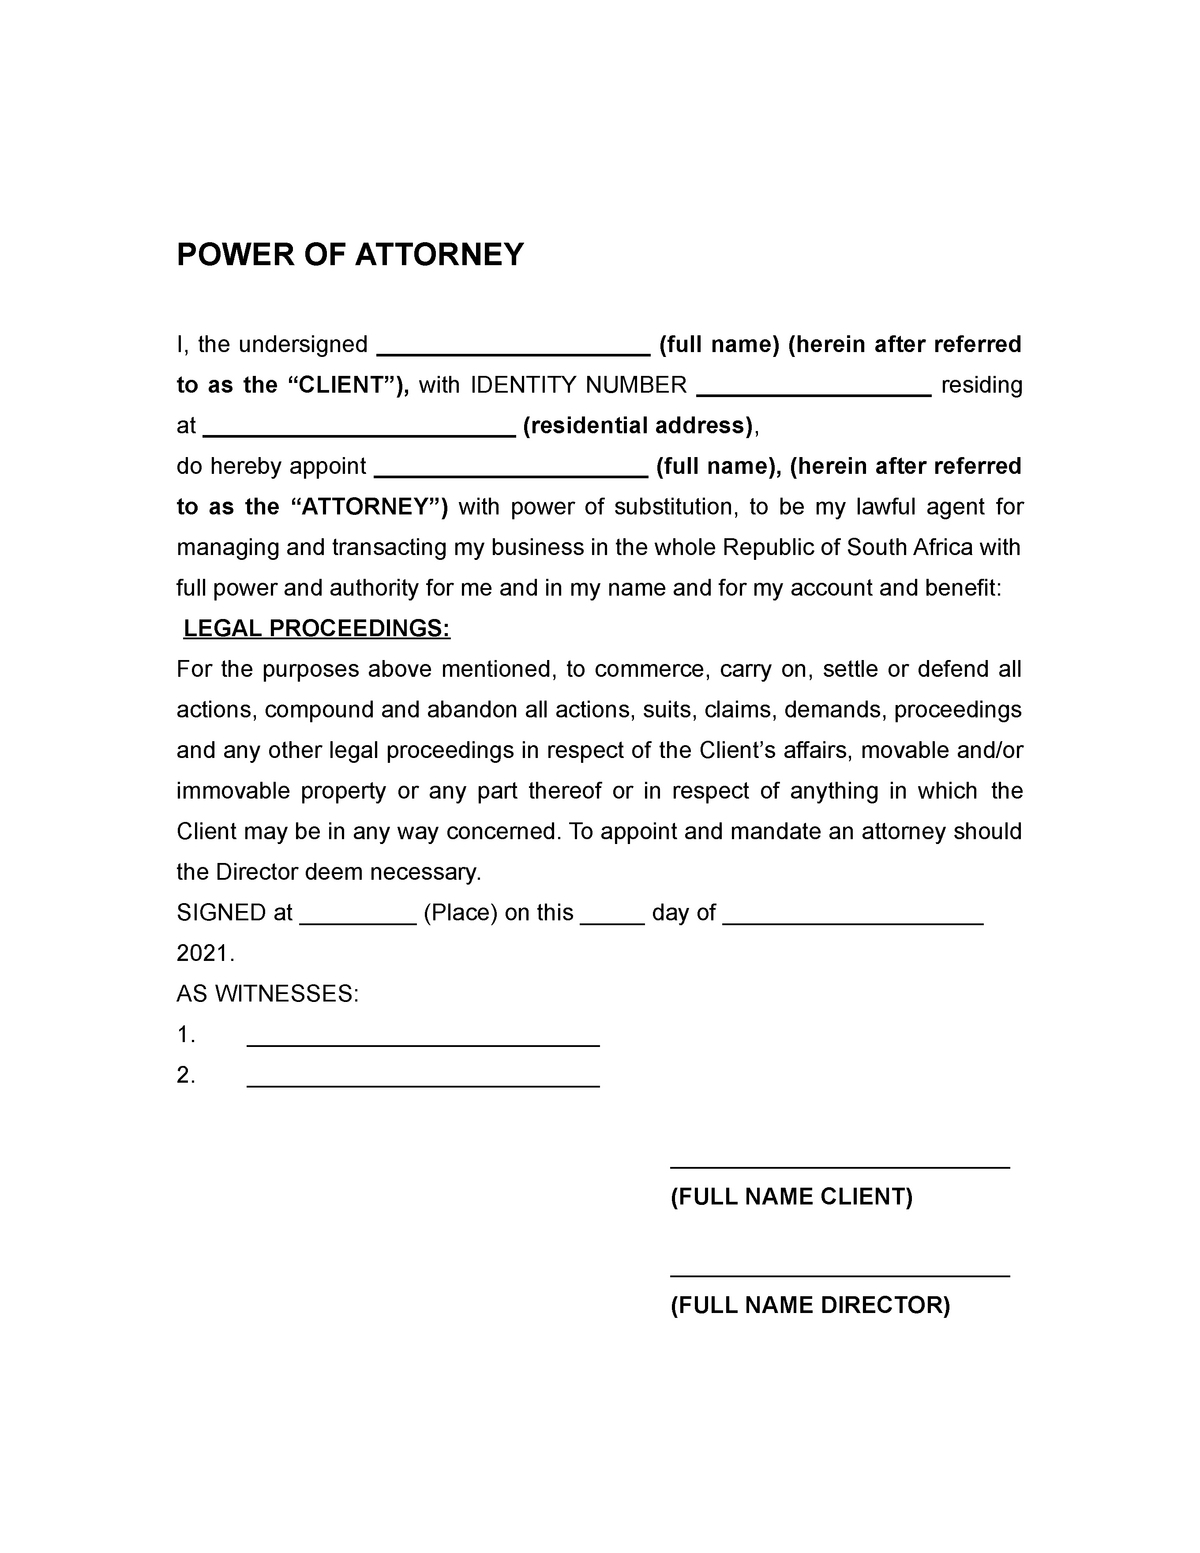 Sample Power Of Attorney Signature Sample Power Of Attorney Blog 2673